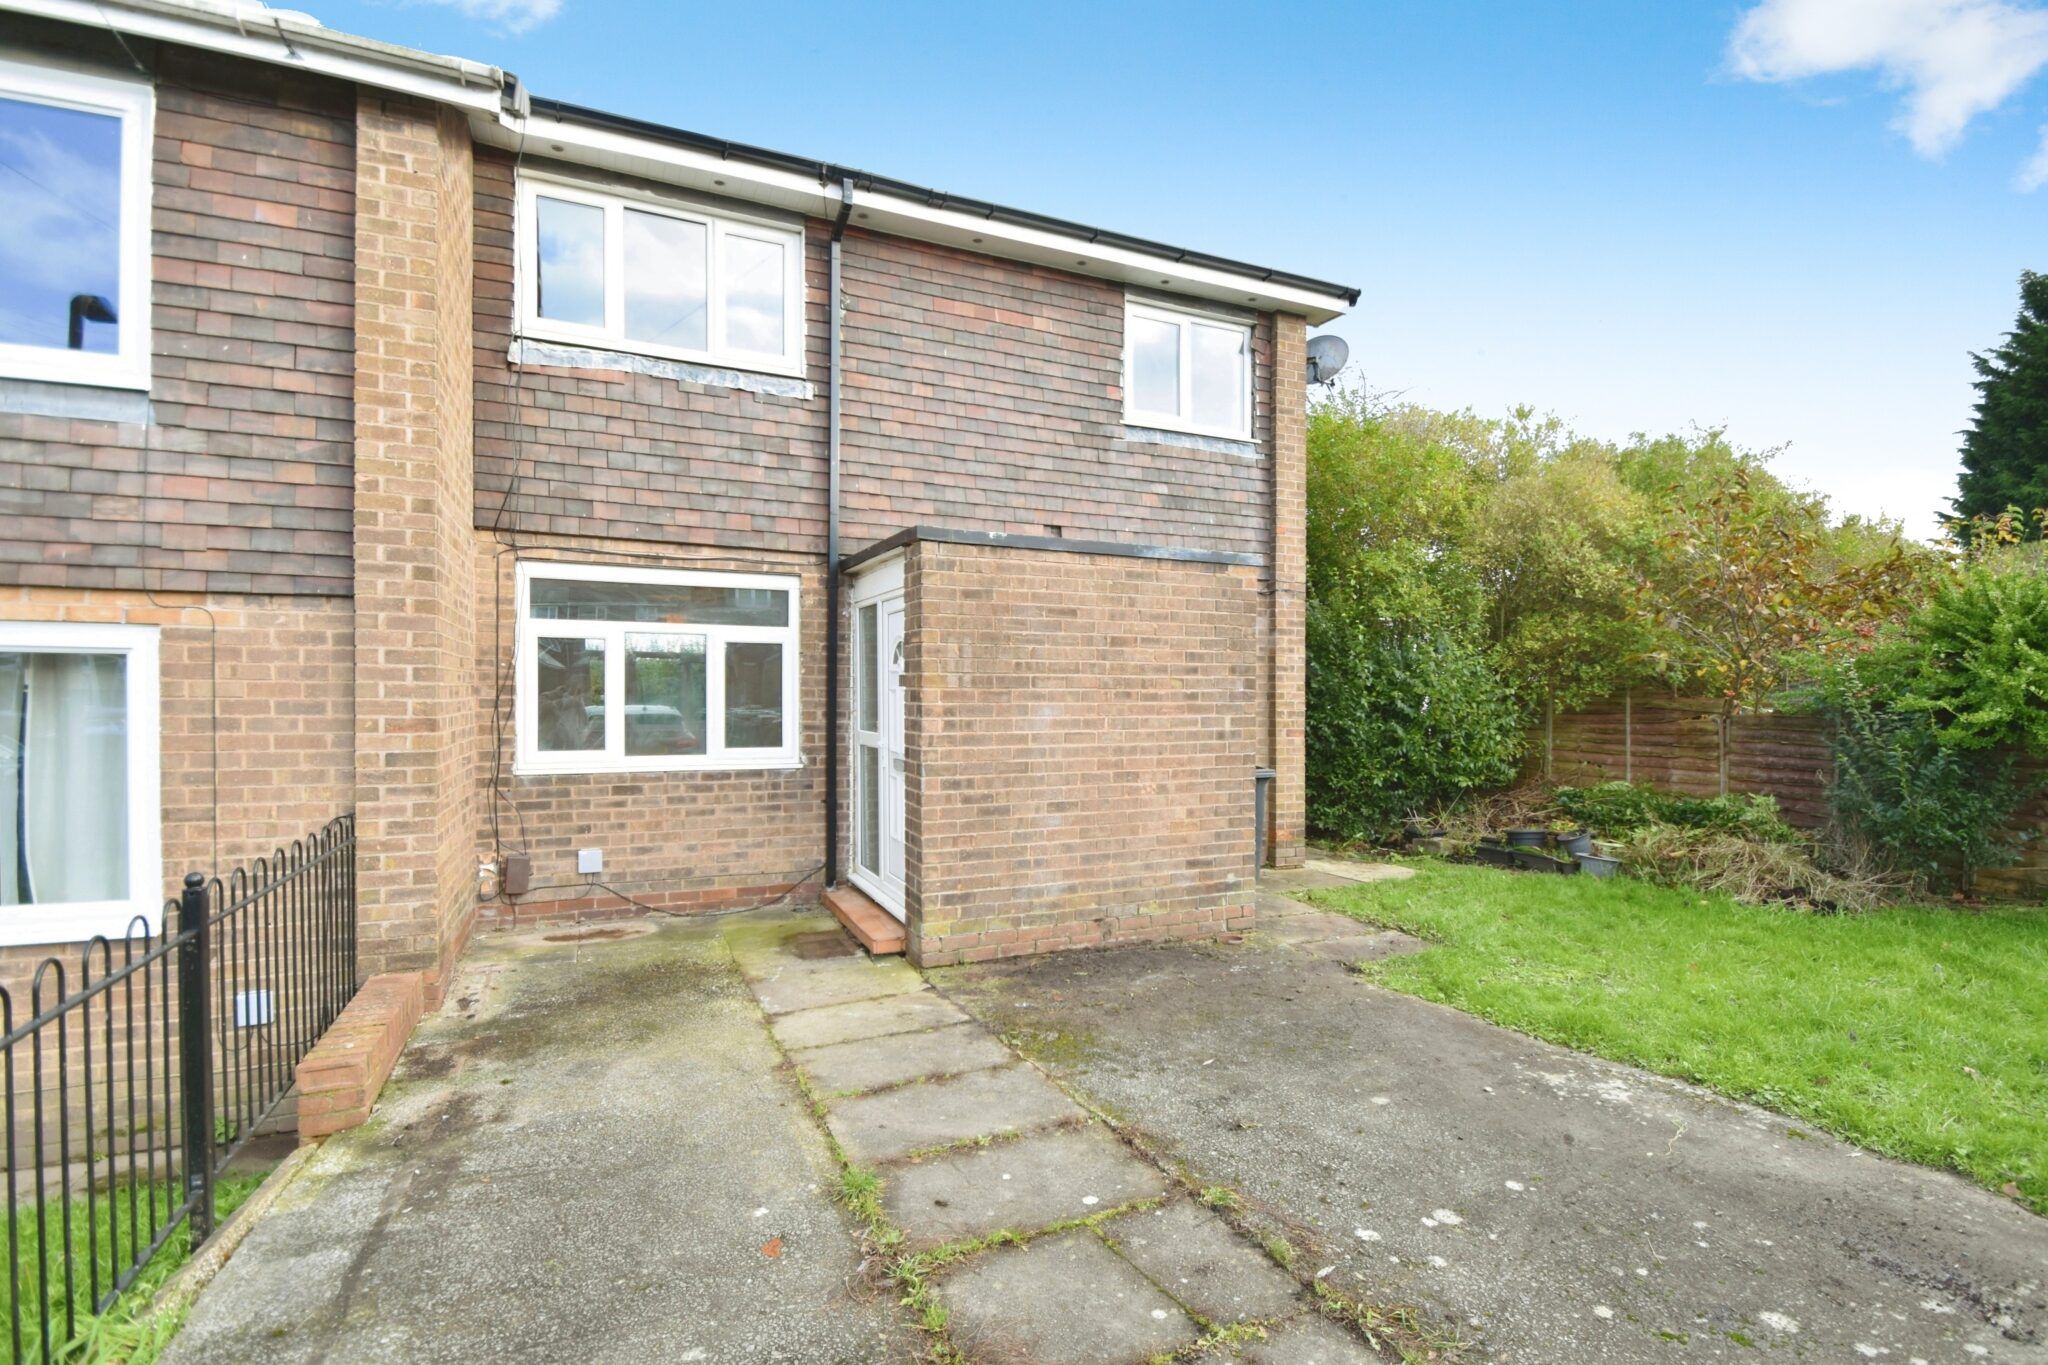 Lune Close, Whitefield, Manchester, Manchester, M45 8WG